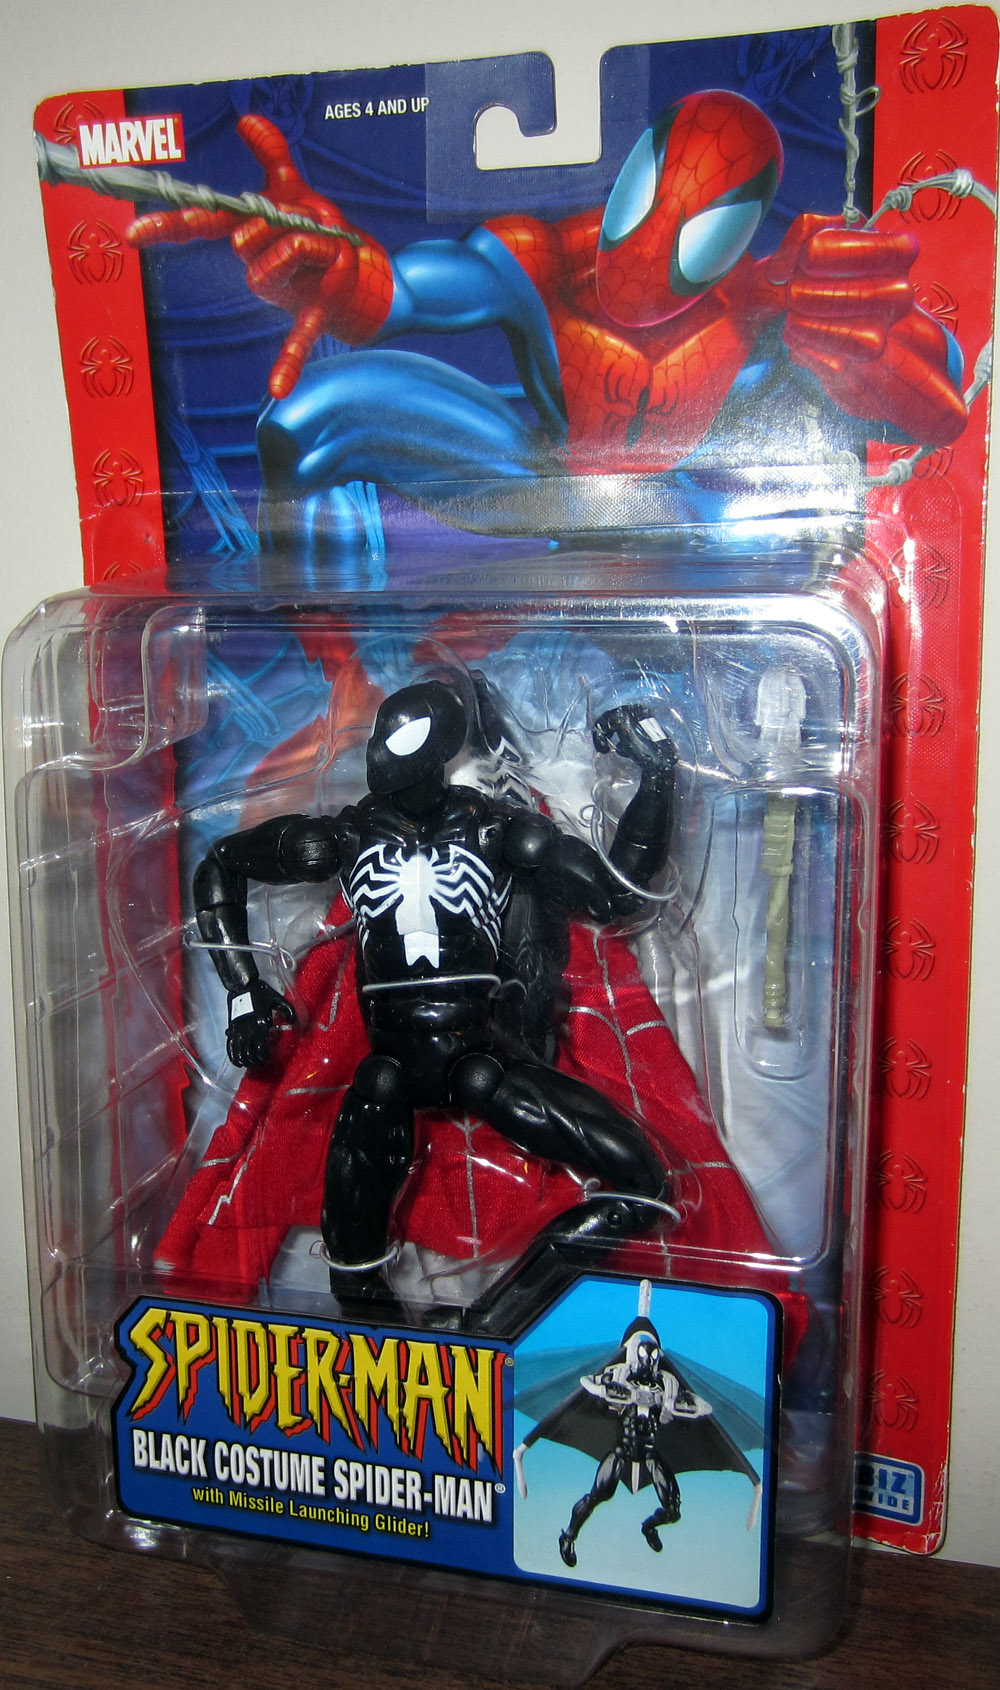 Spider-Man Black Costume With Missile Launching Glider Marvel Legends A41 